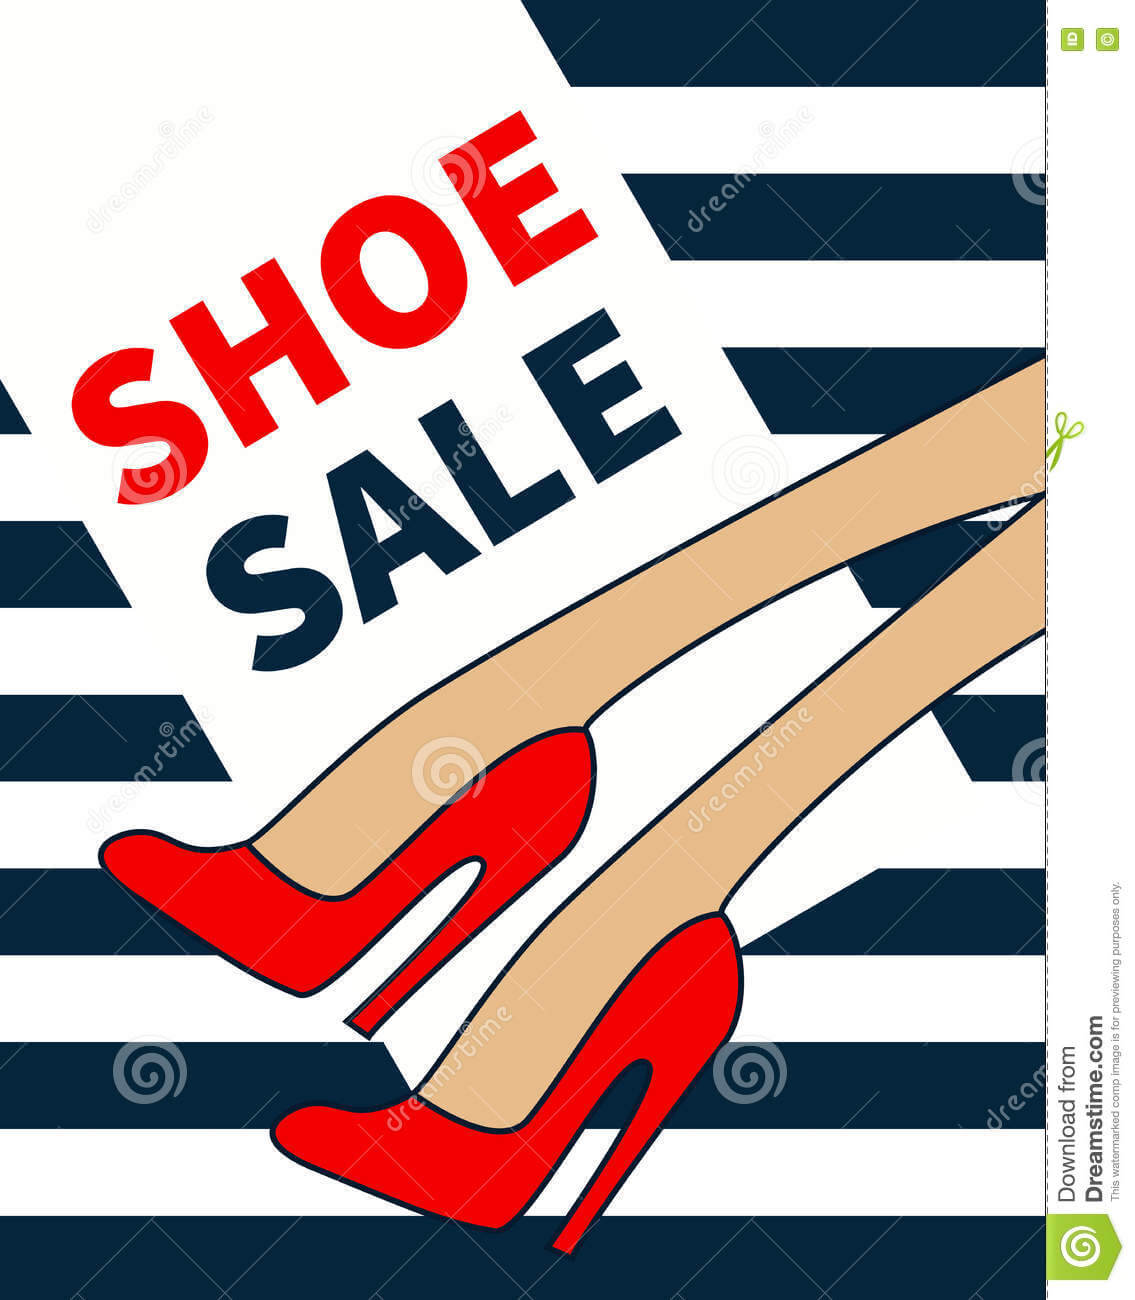 Vector Shoe Sale Stock Vector. Illustration Of Heels – 80561068 With High Heel Template For Cards